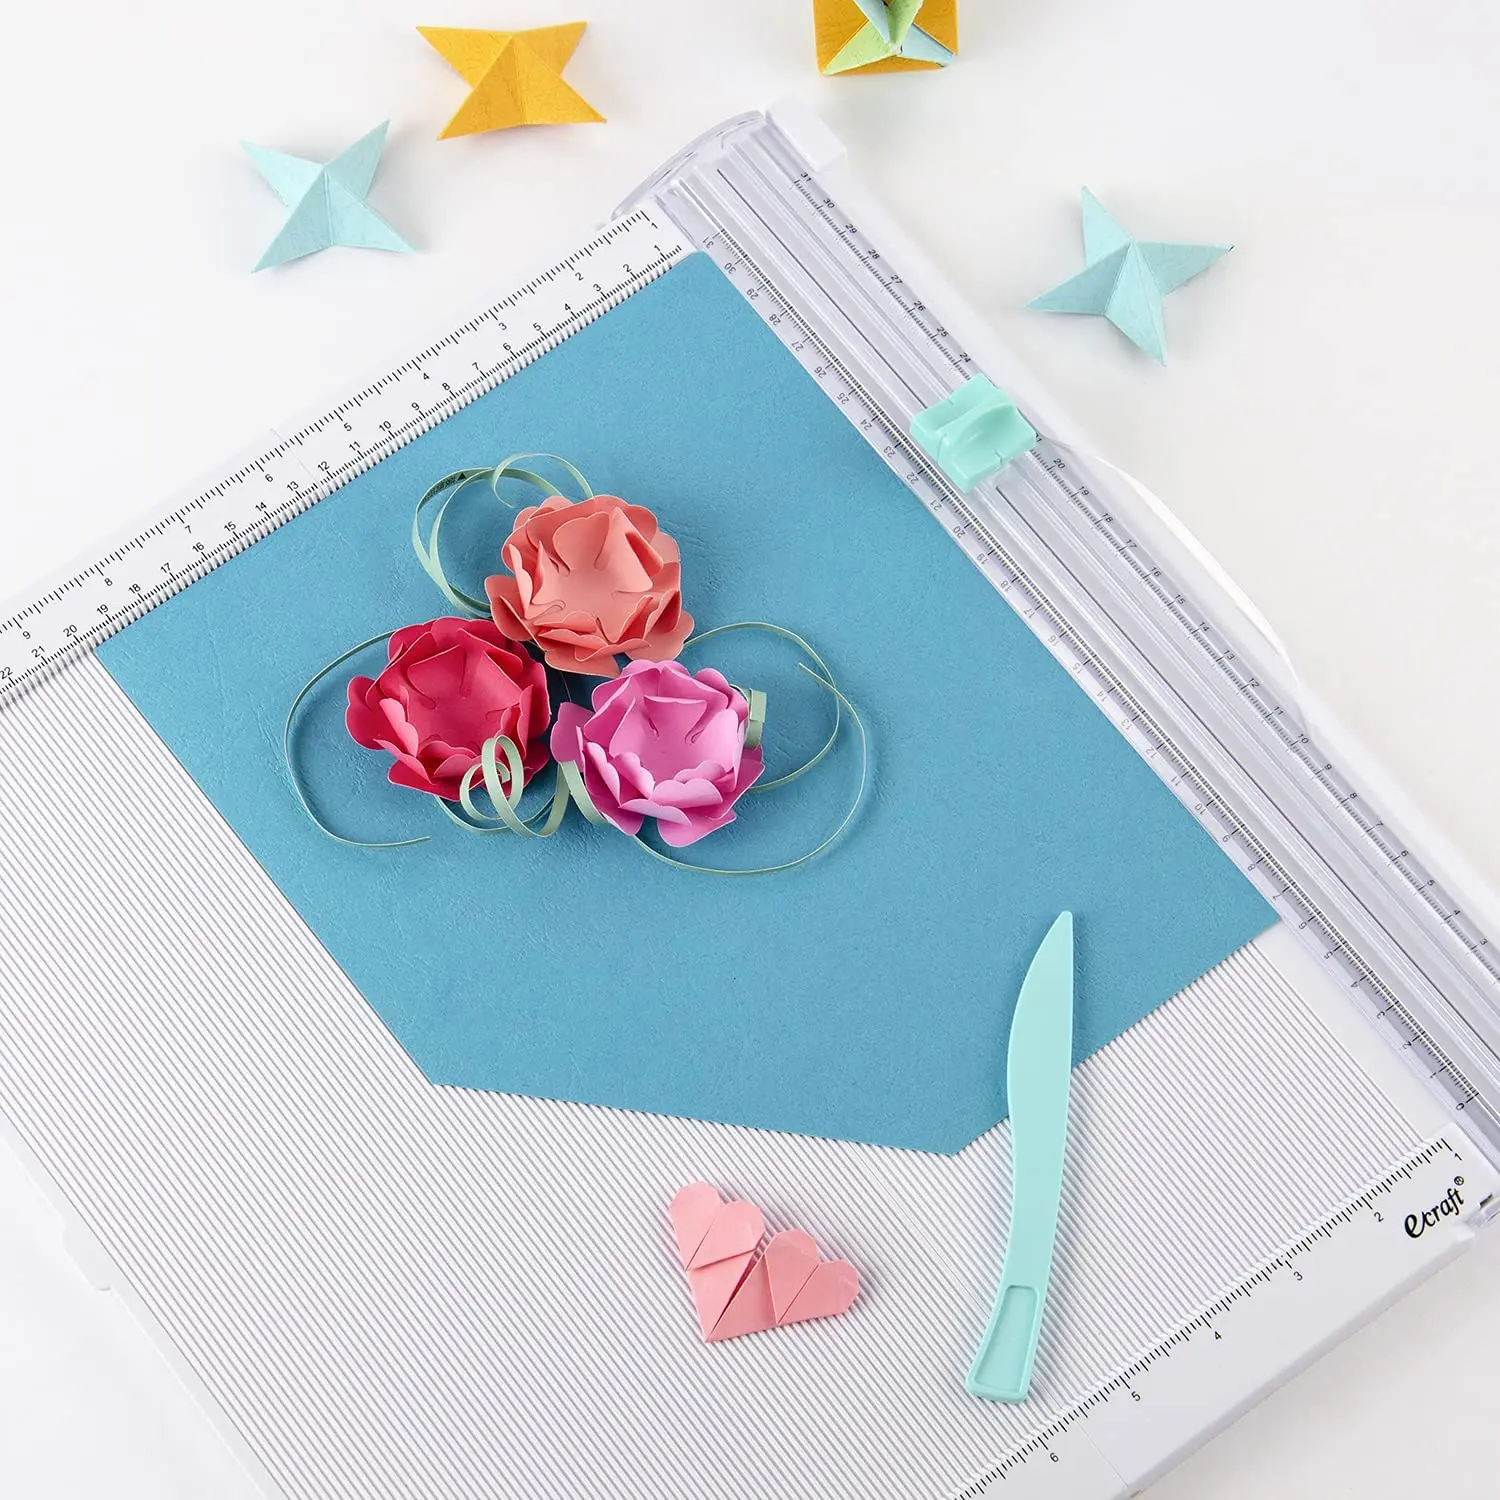 Multifunctional Paper Trimmer Scoring Board Collapsible Paper Cutting  Scoring Pad for Ideal for Art Paper Craft Invitati - AliExpress